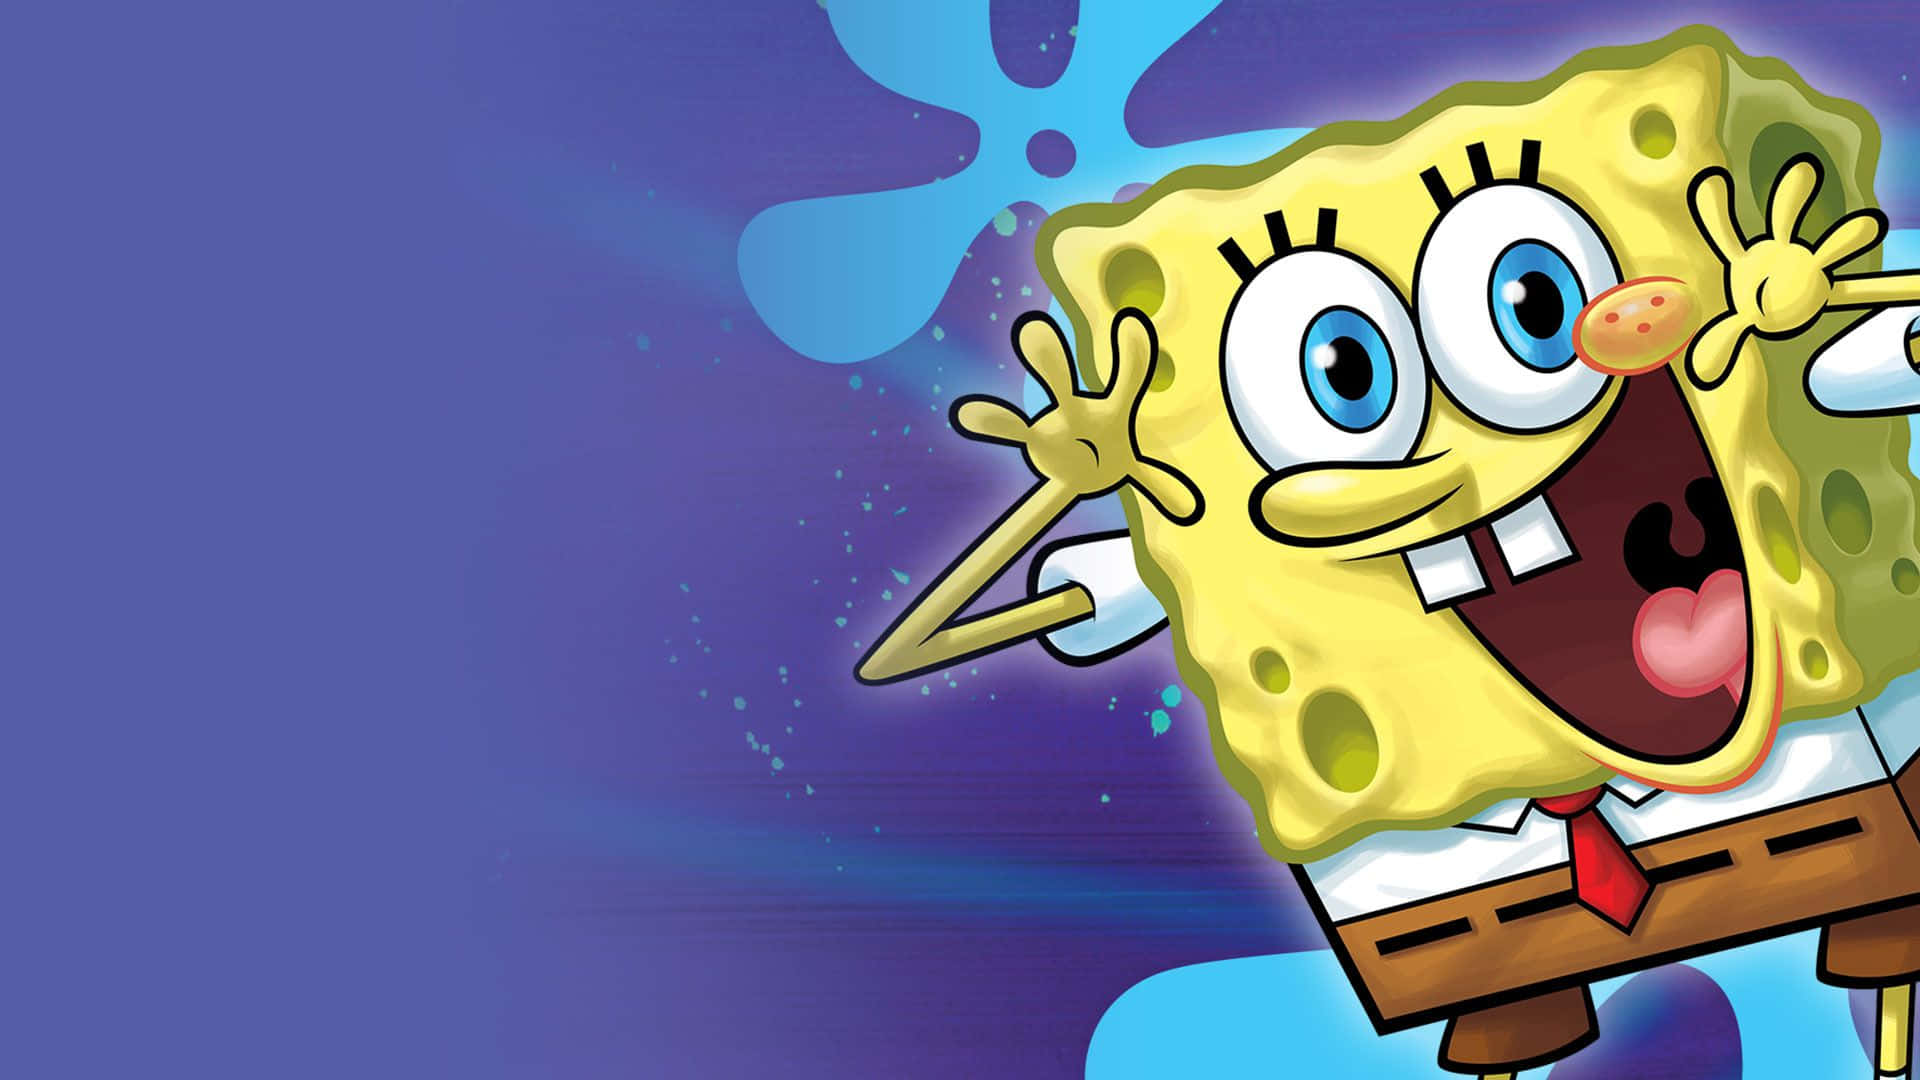 Have A Fun Day With Spongebob On Your Desktop Background